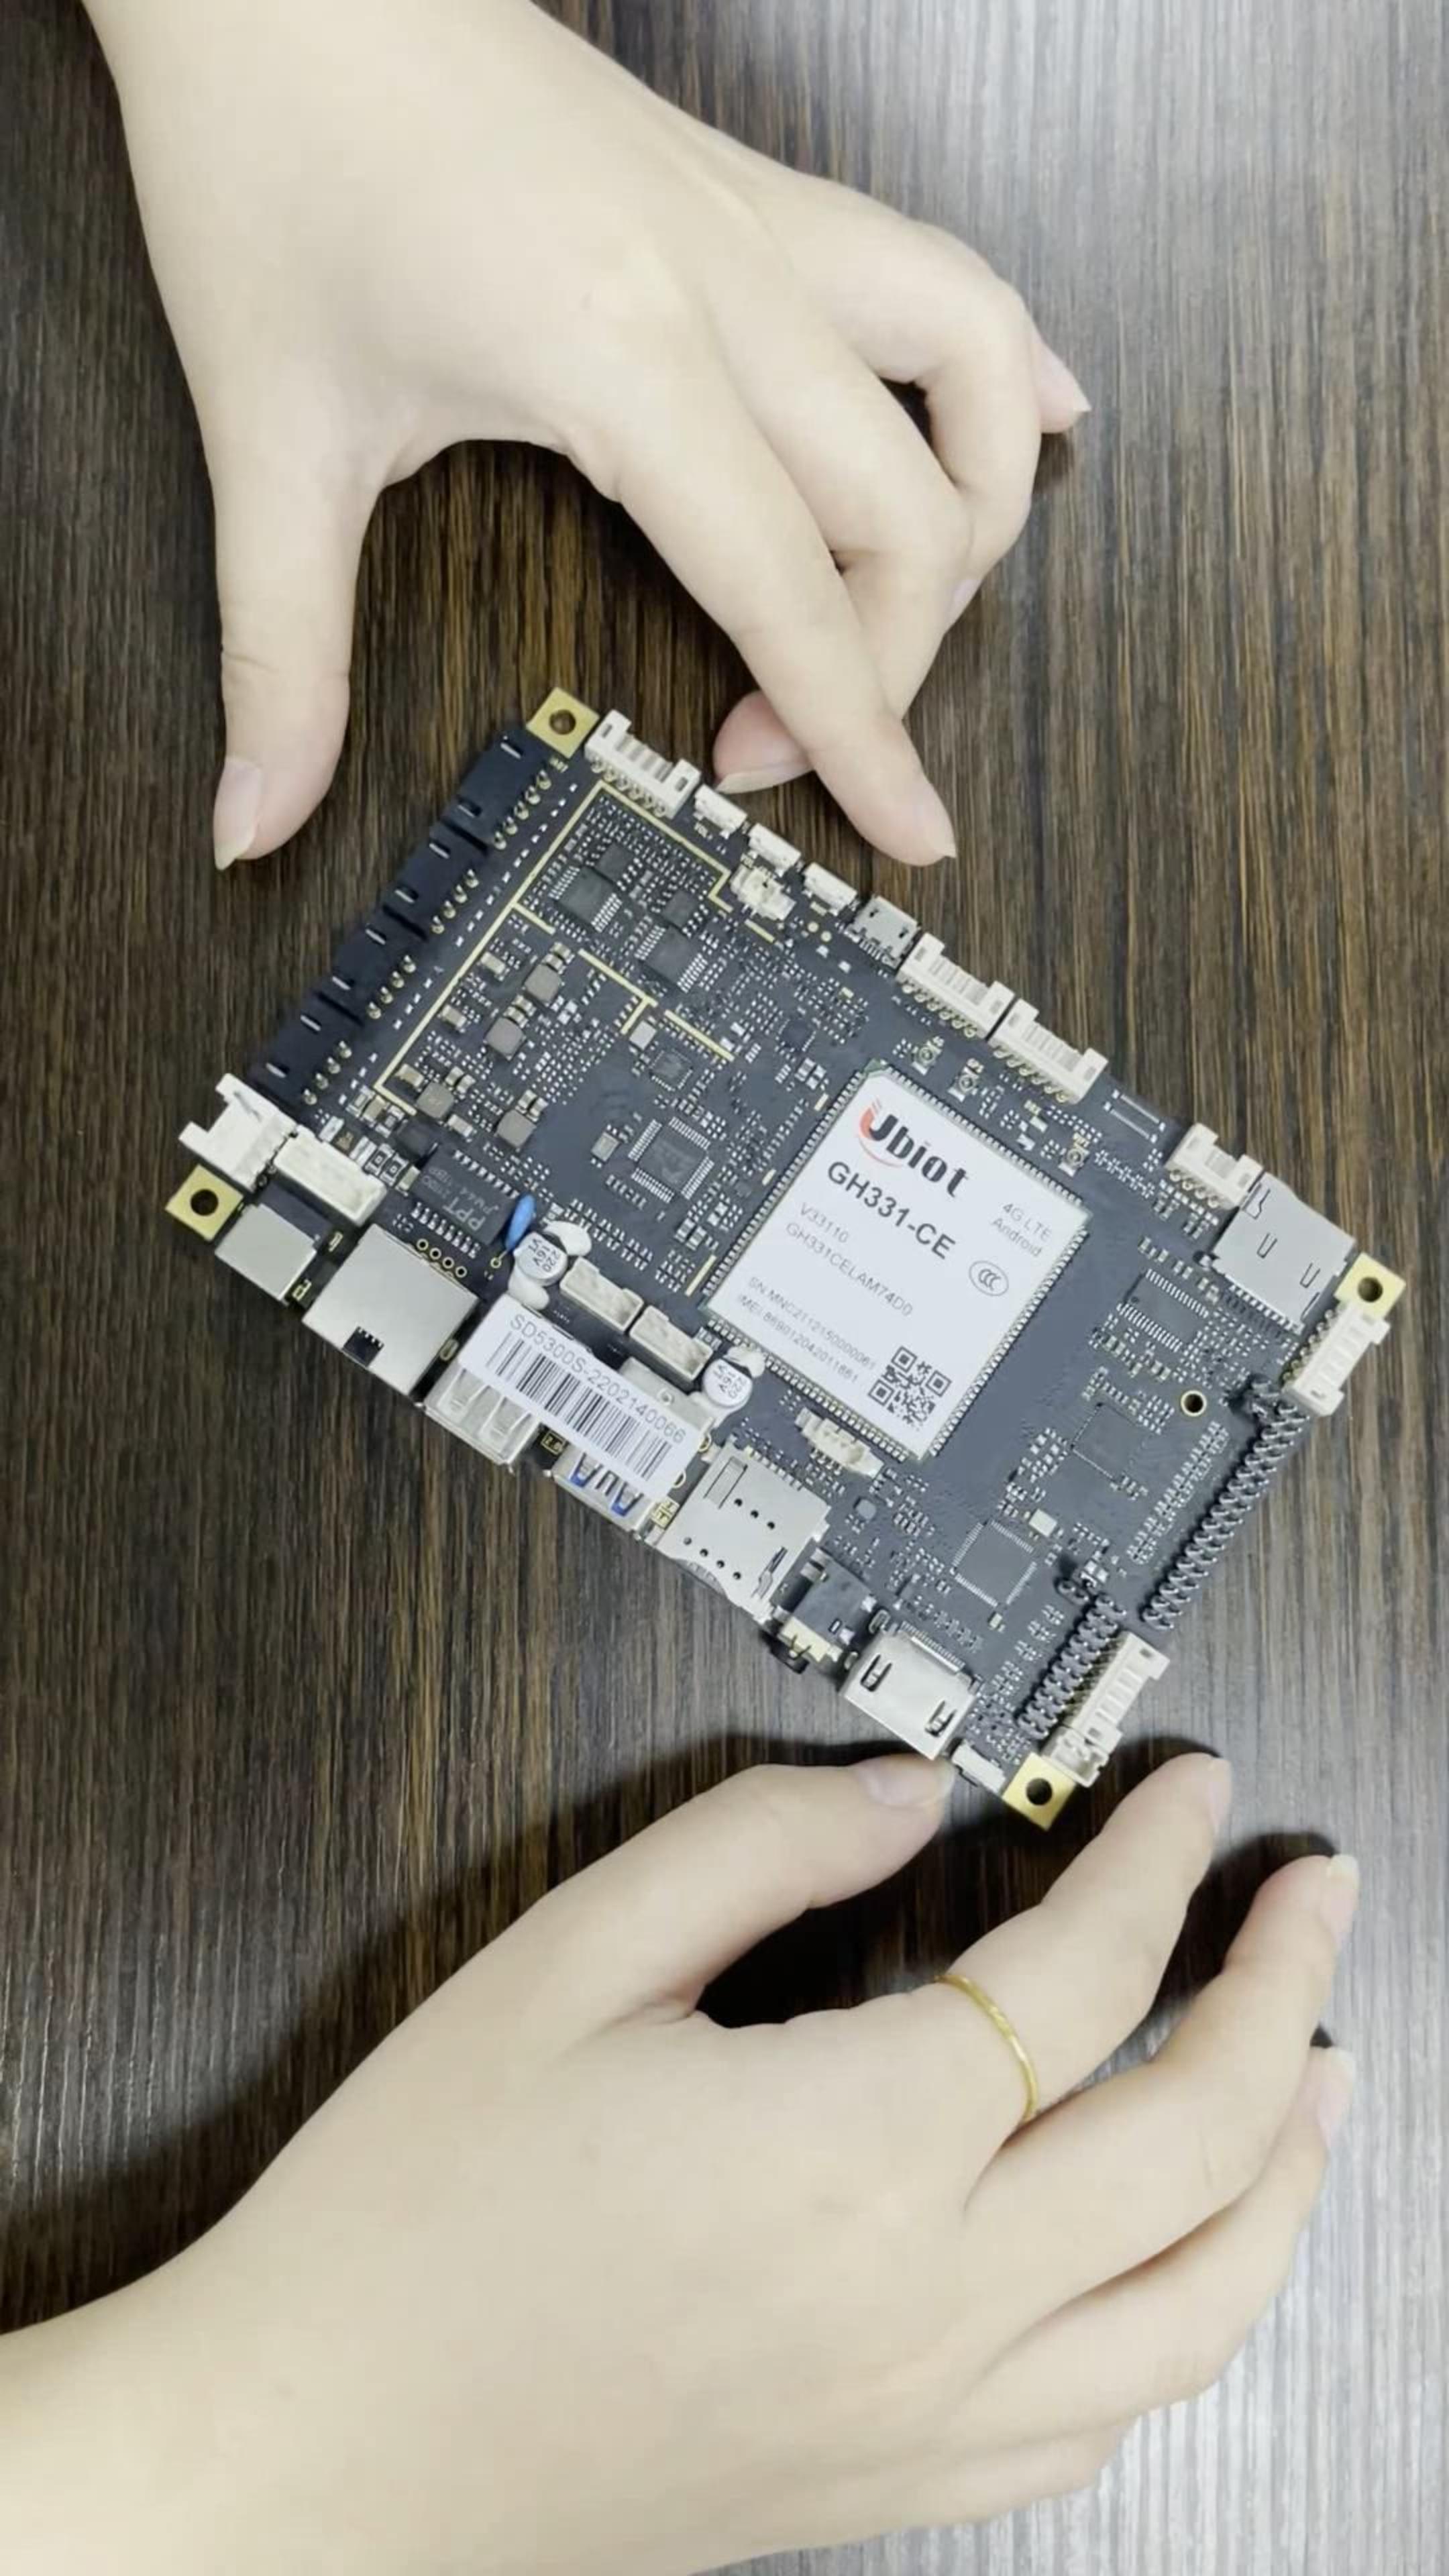 embedded computer in china